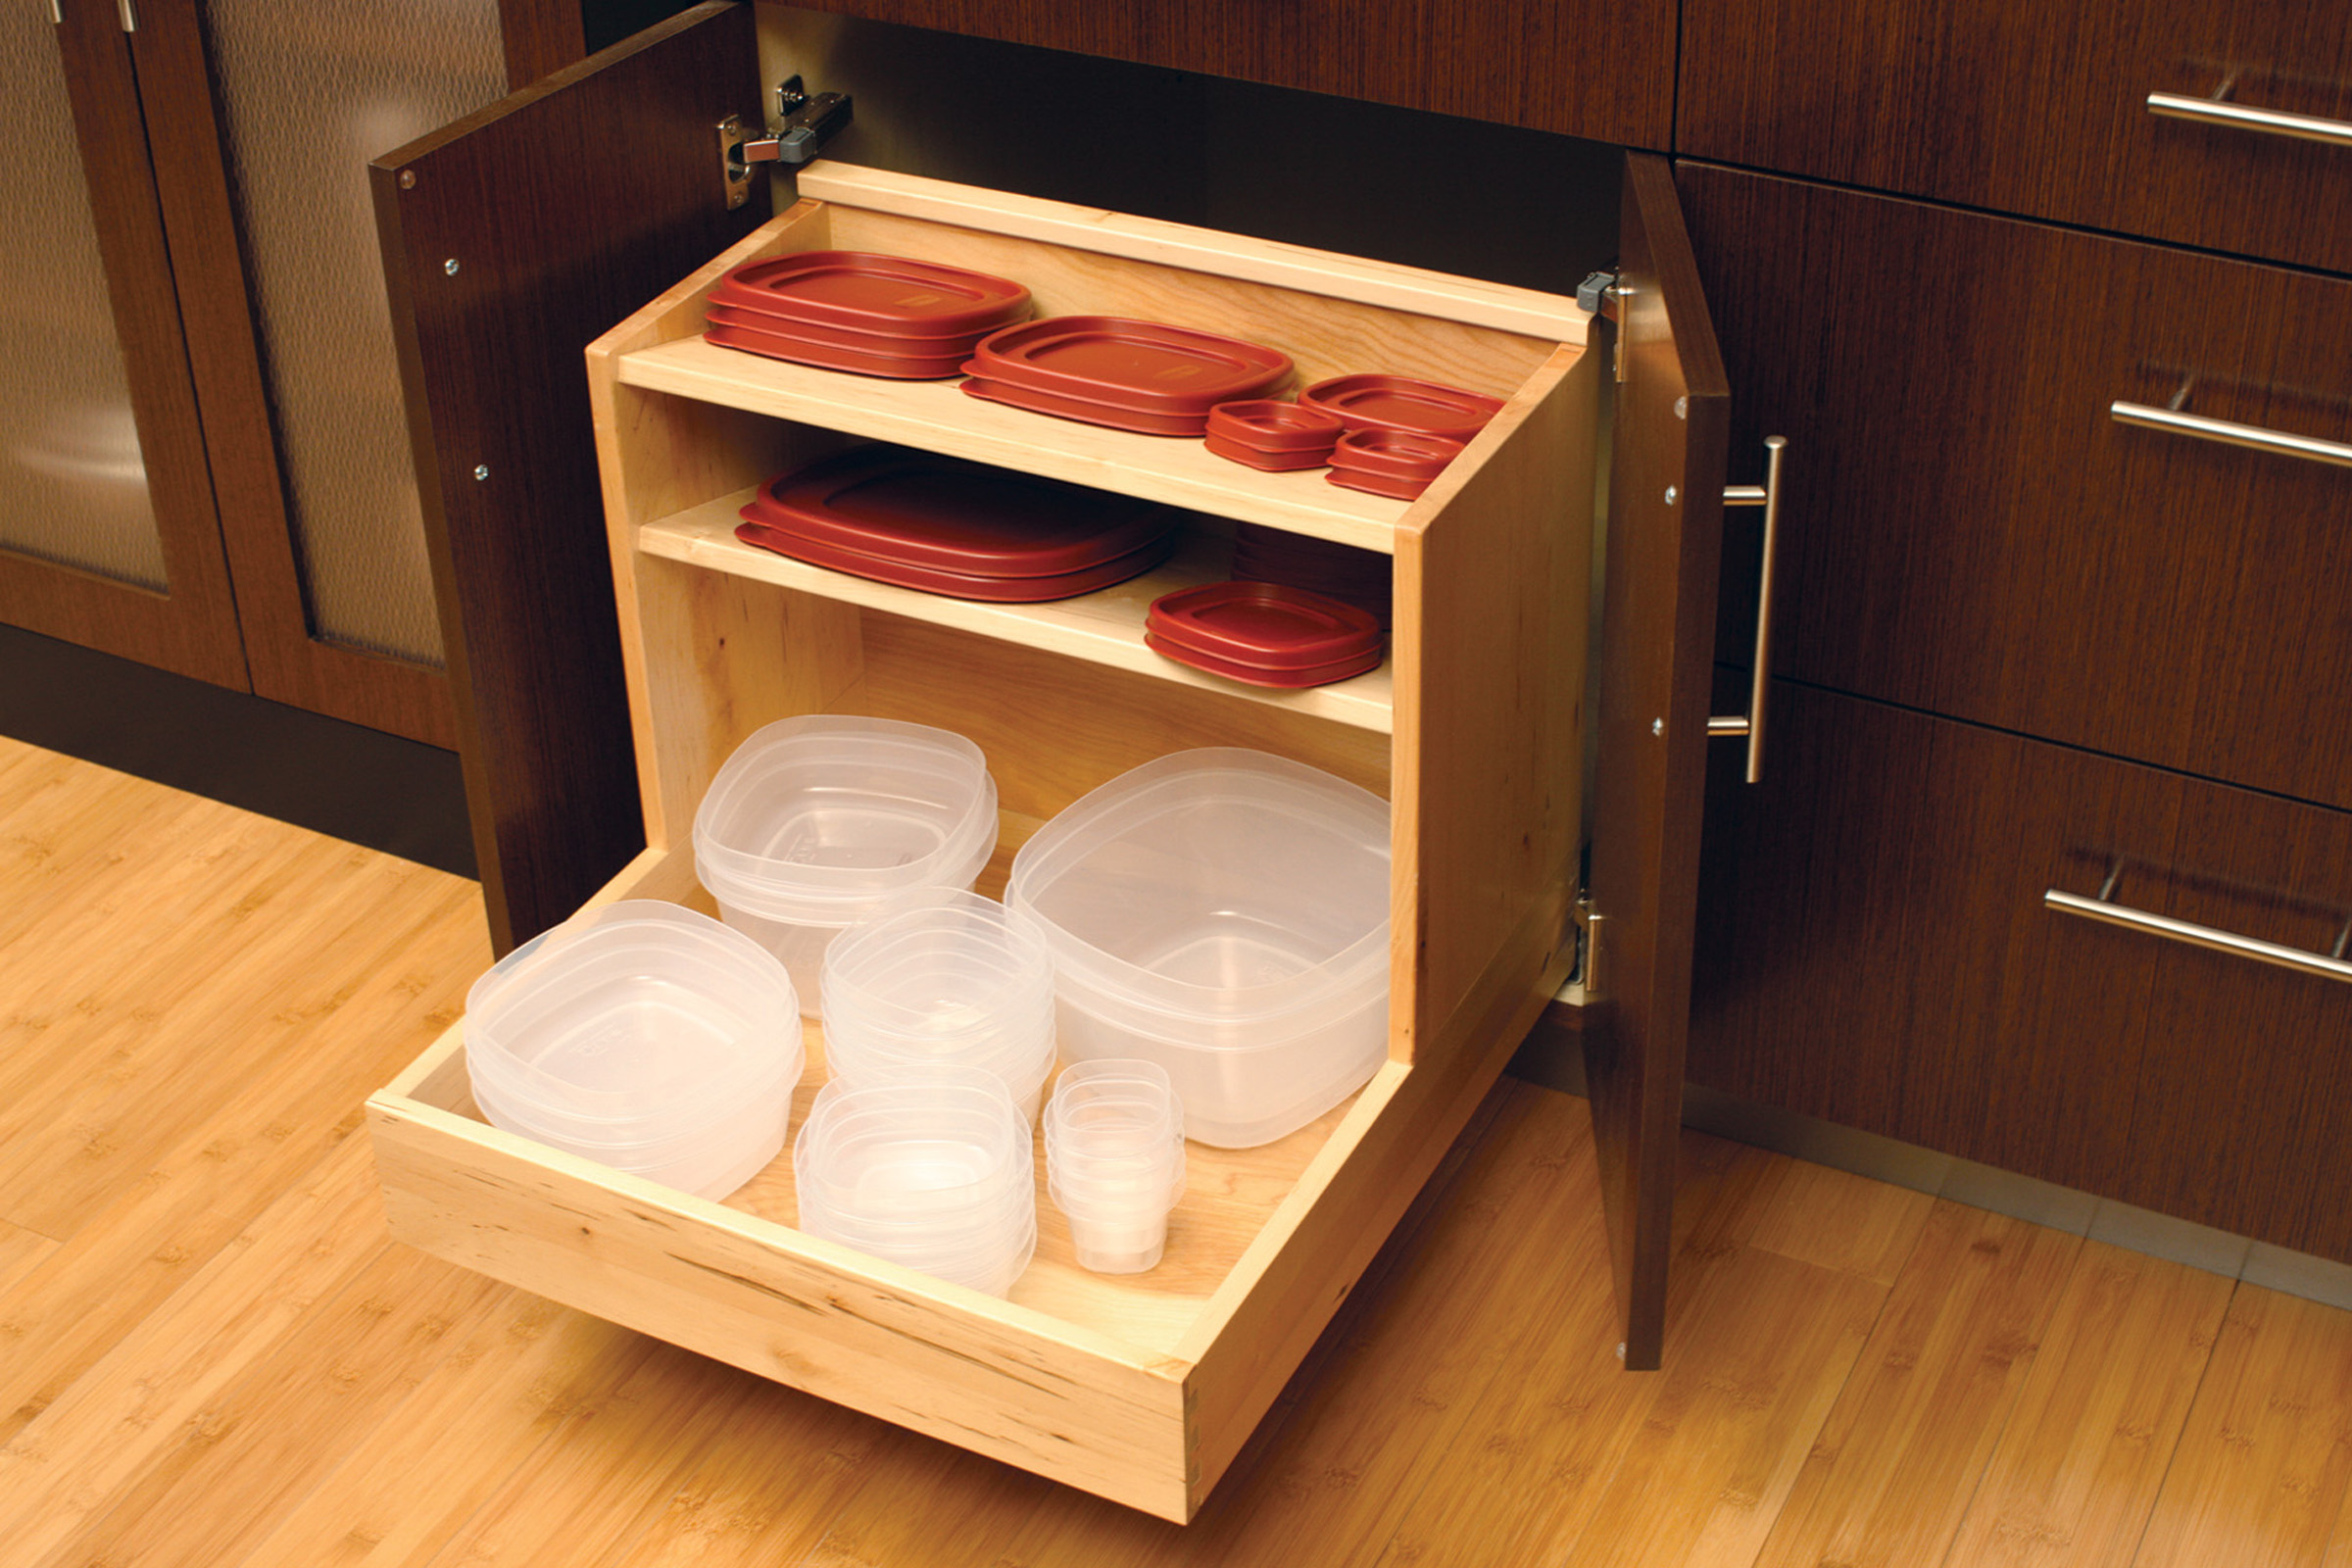 Neatly store your plastic storage containers and lids in this convenient roll-out accessory from Dura Supreme Cabinetry.